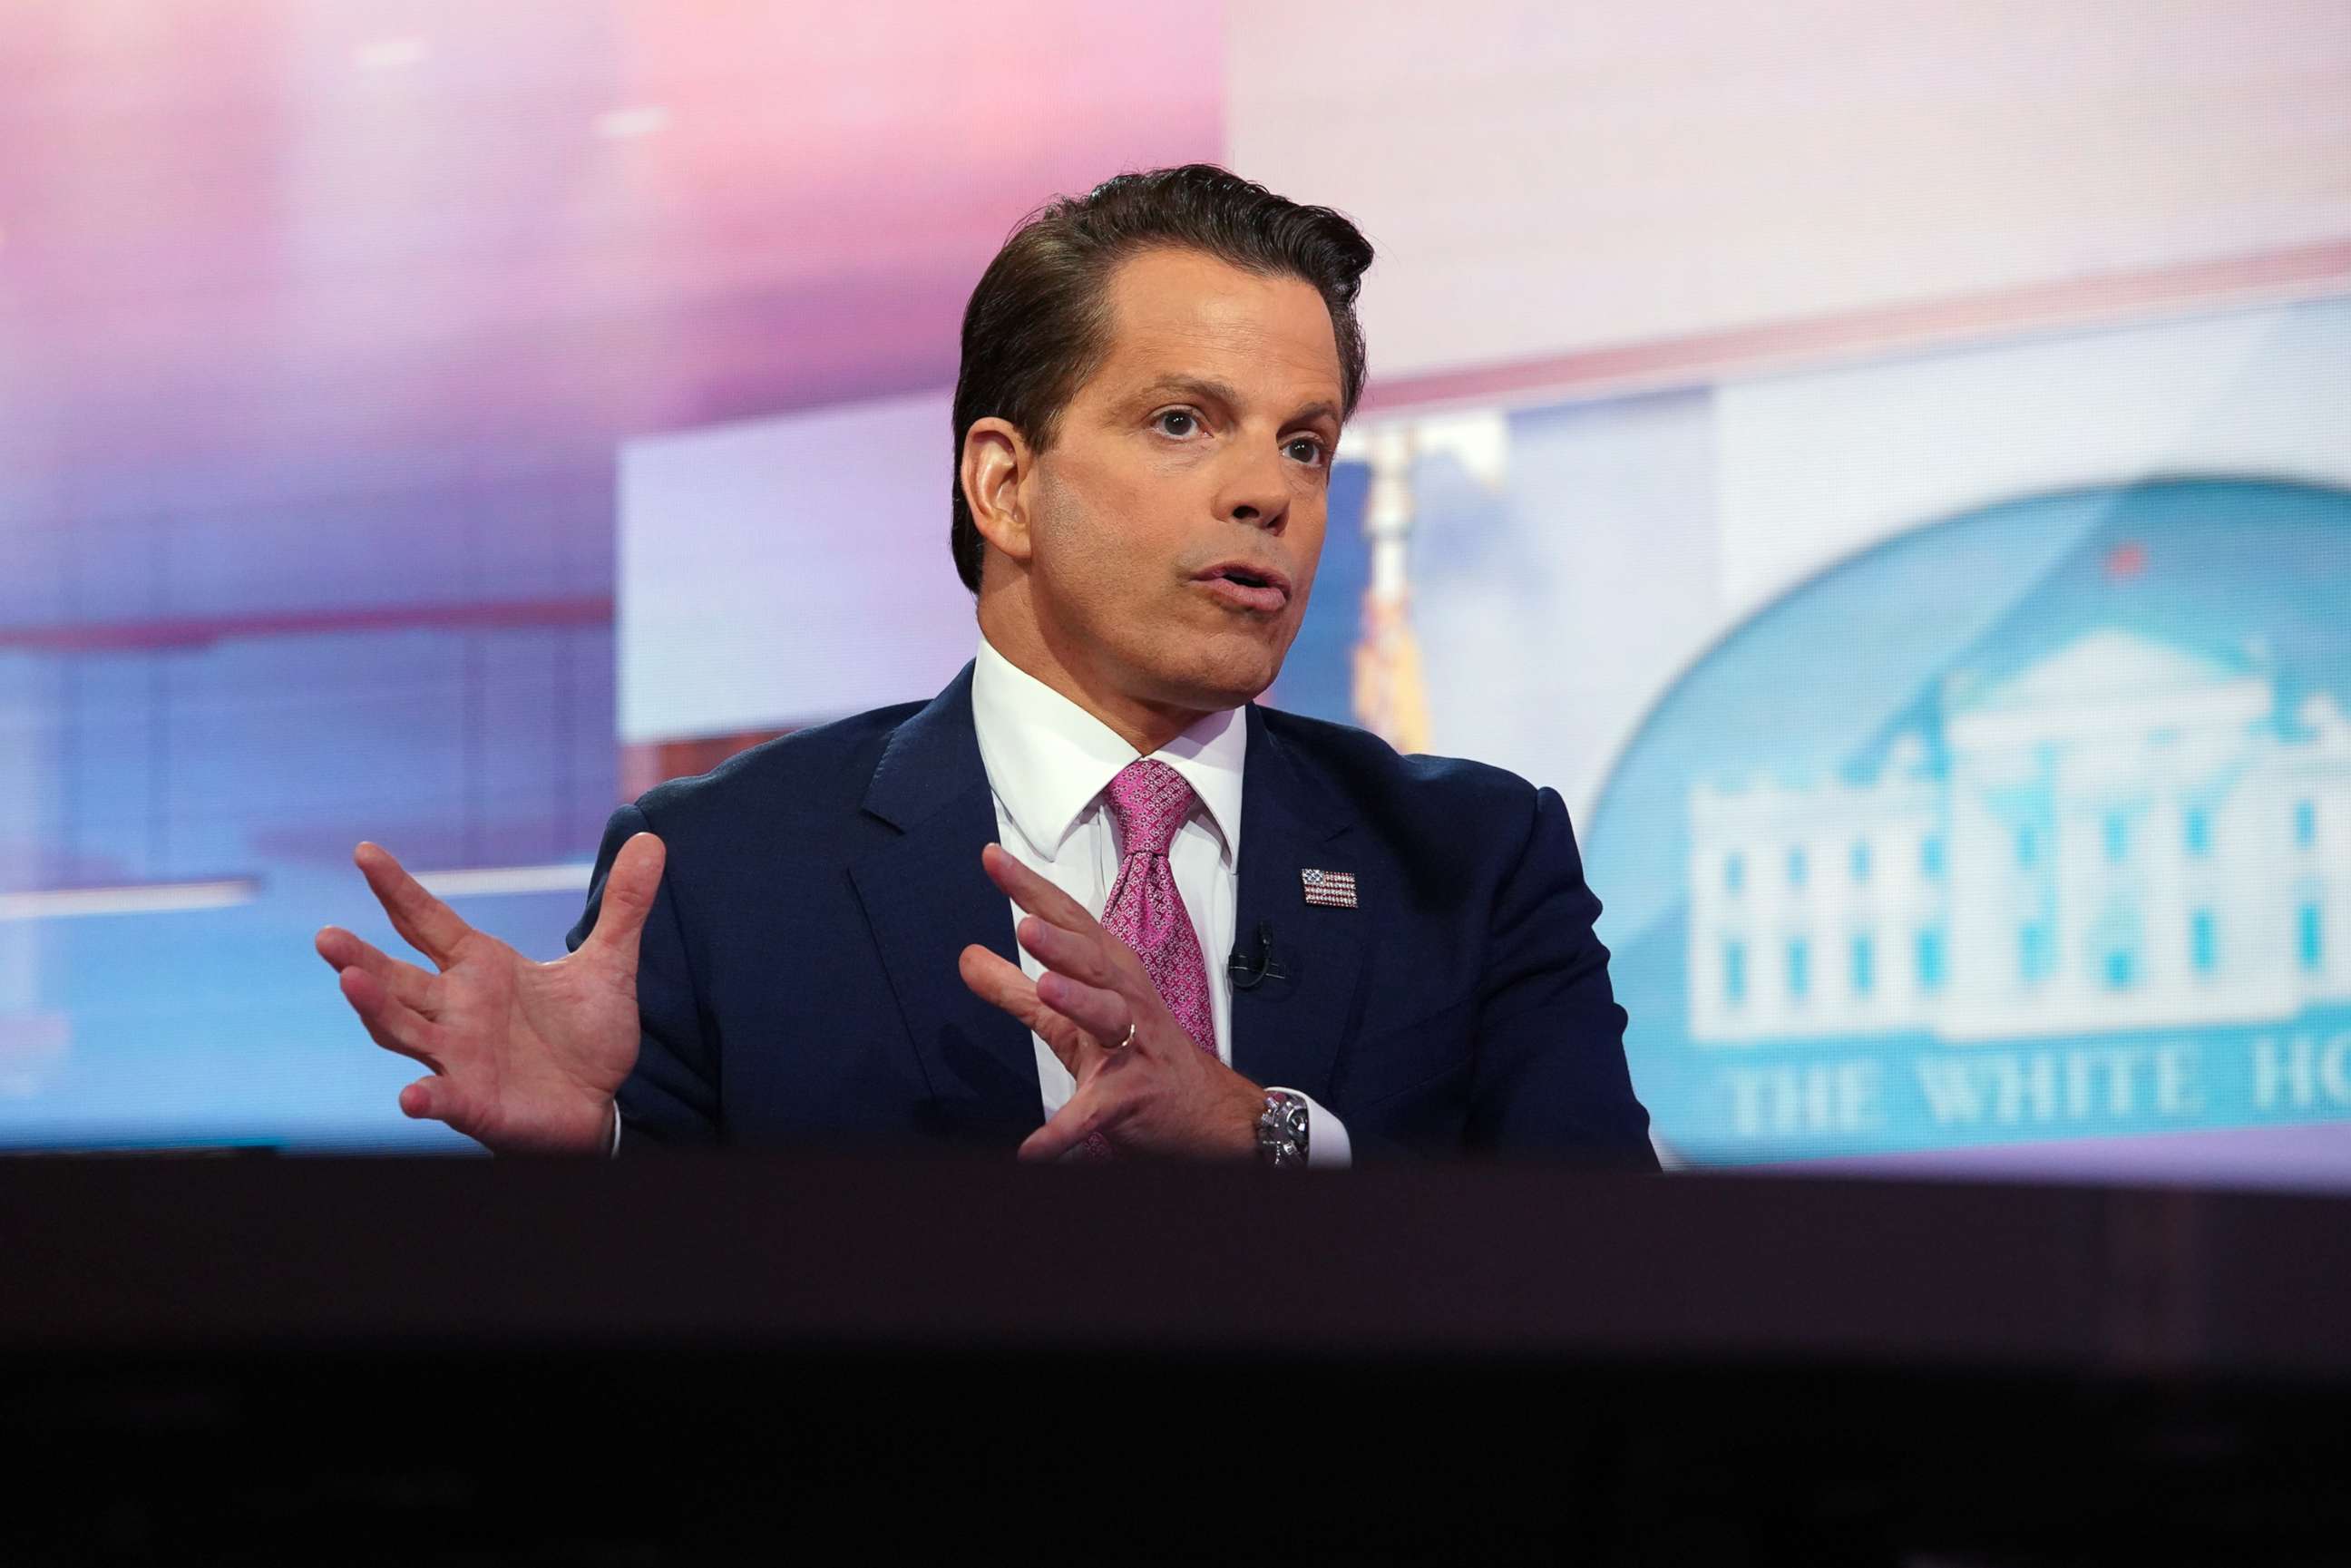 PHOTO: Anthony Scaramucci, former director of communications for the White House and founder of SkyBridge Capital II LLC, speaks in New York, Aug. 6, 2019.